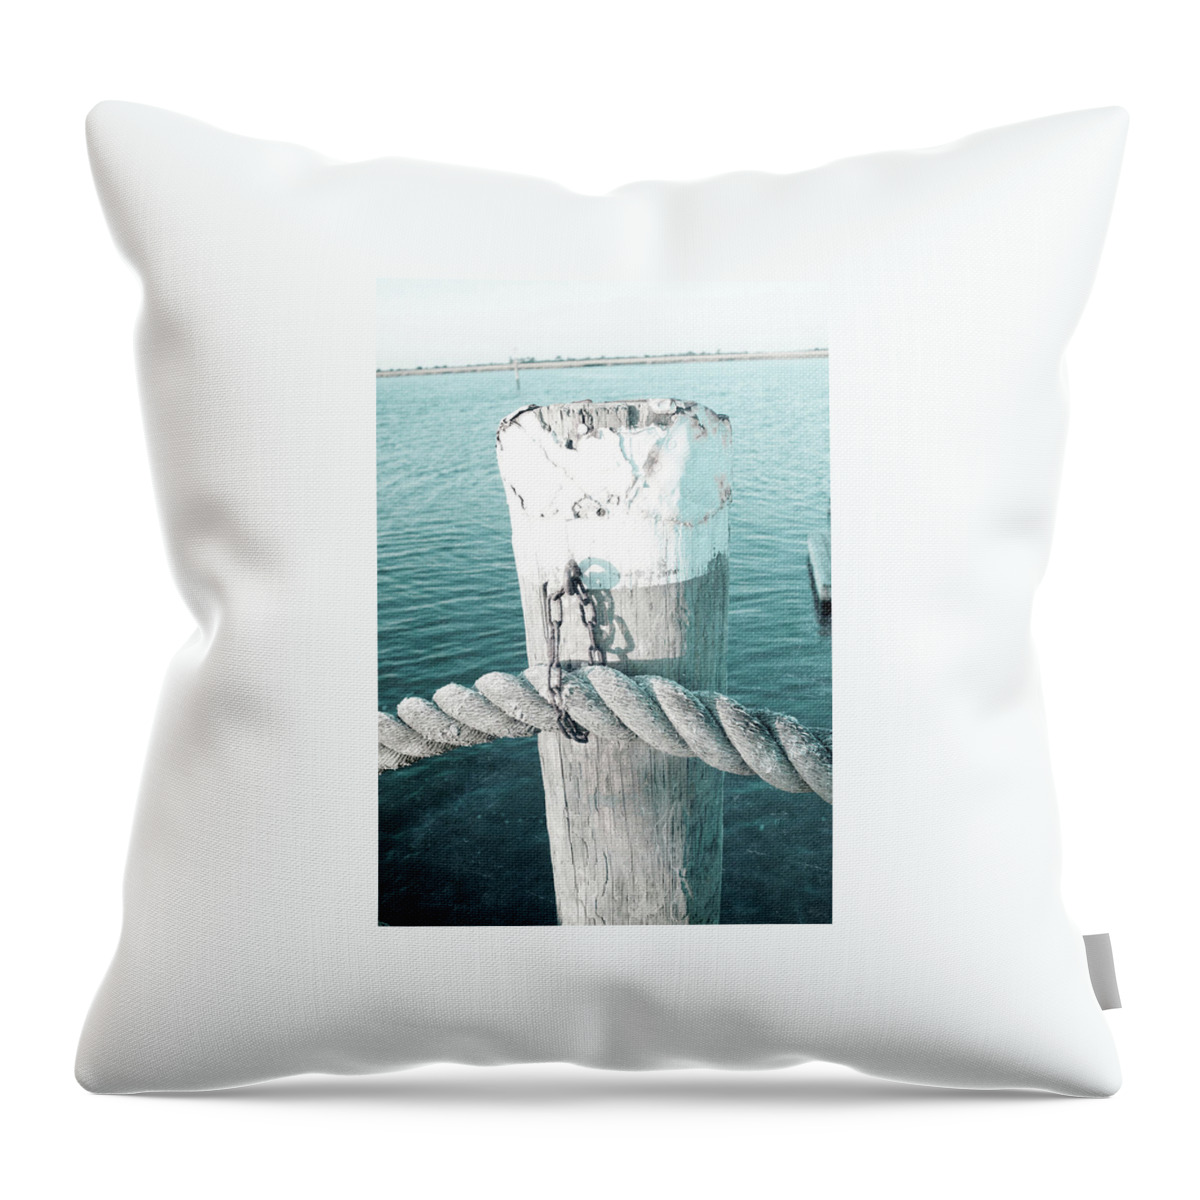 Rope Throw Pillow featuring the digital art Rope On Post II by Susan Bryant